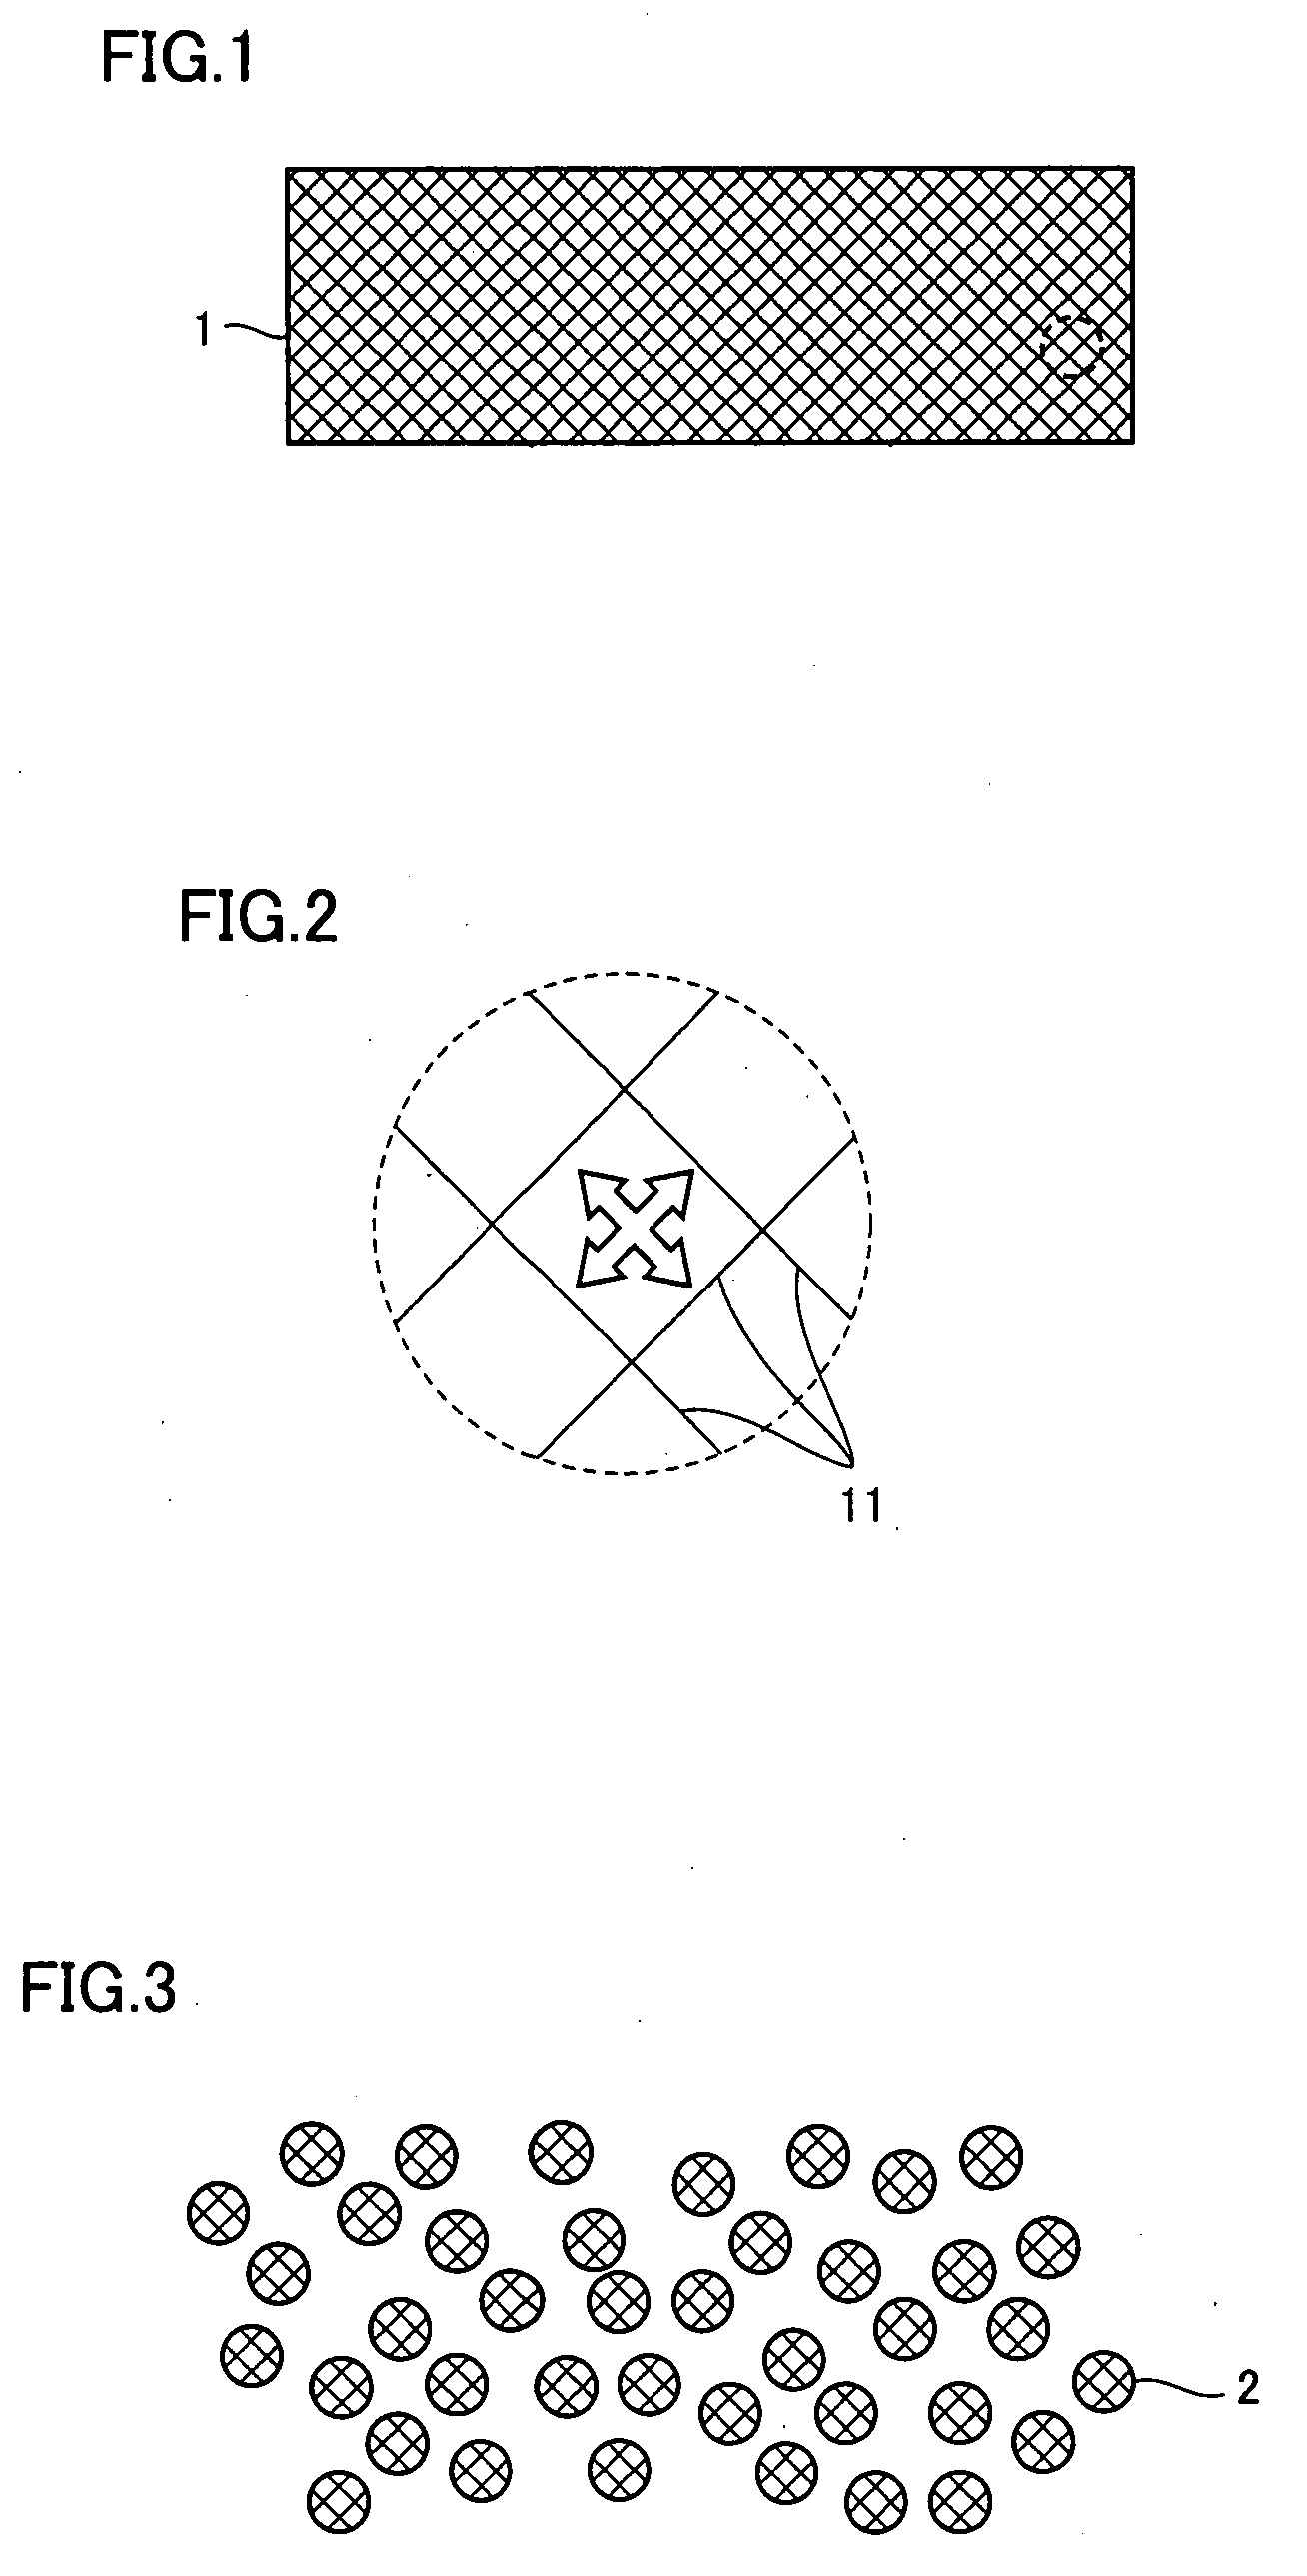 Molding material, molded part, and method for manufacturing them